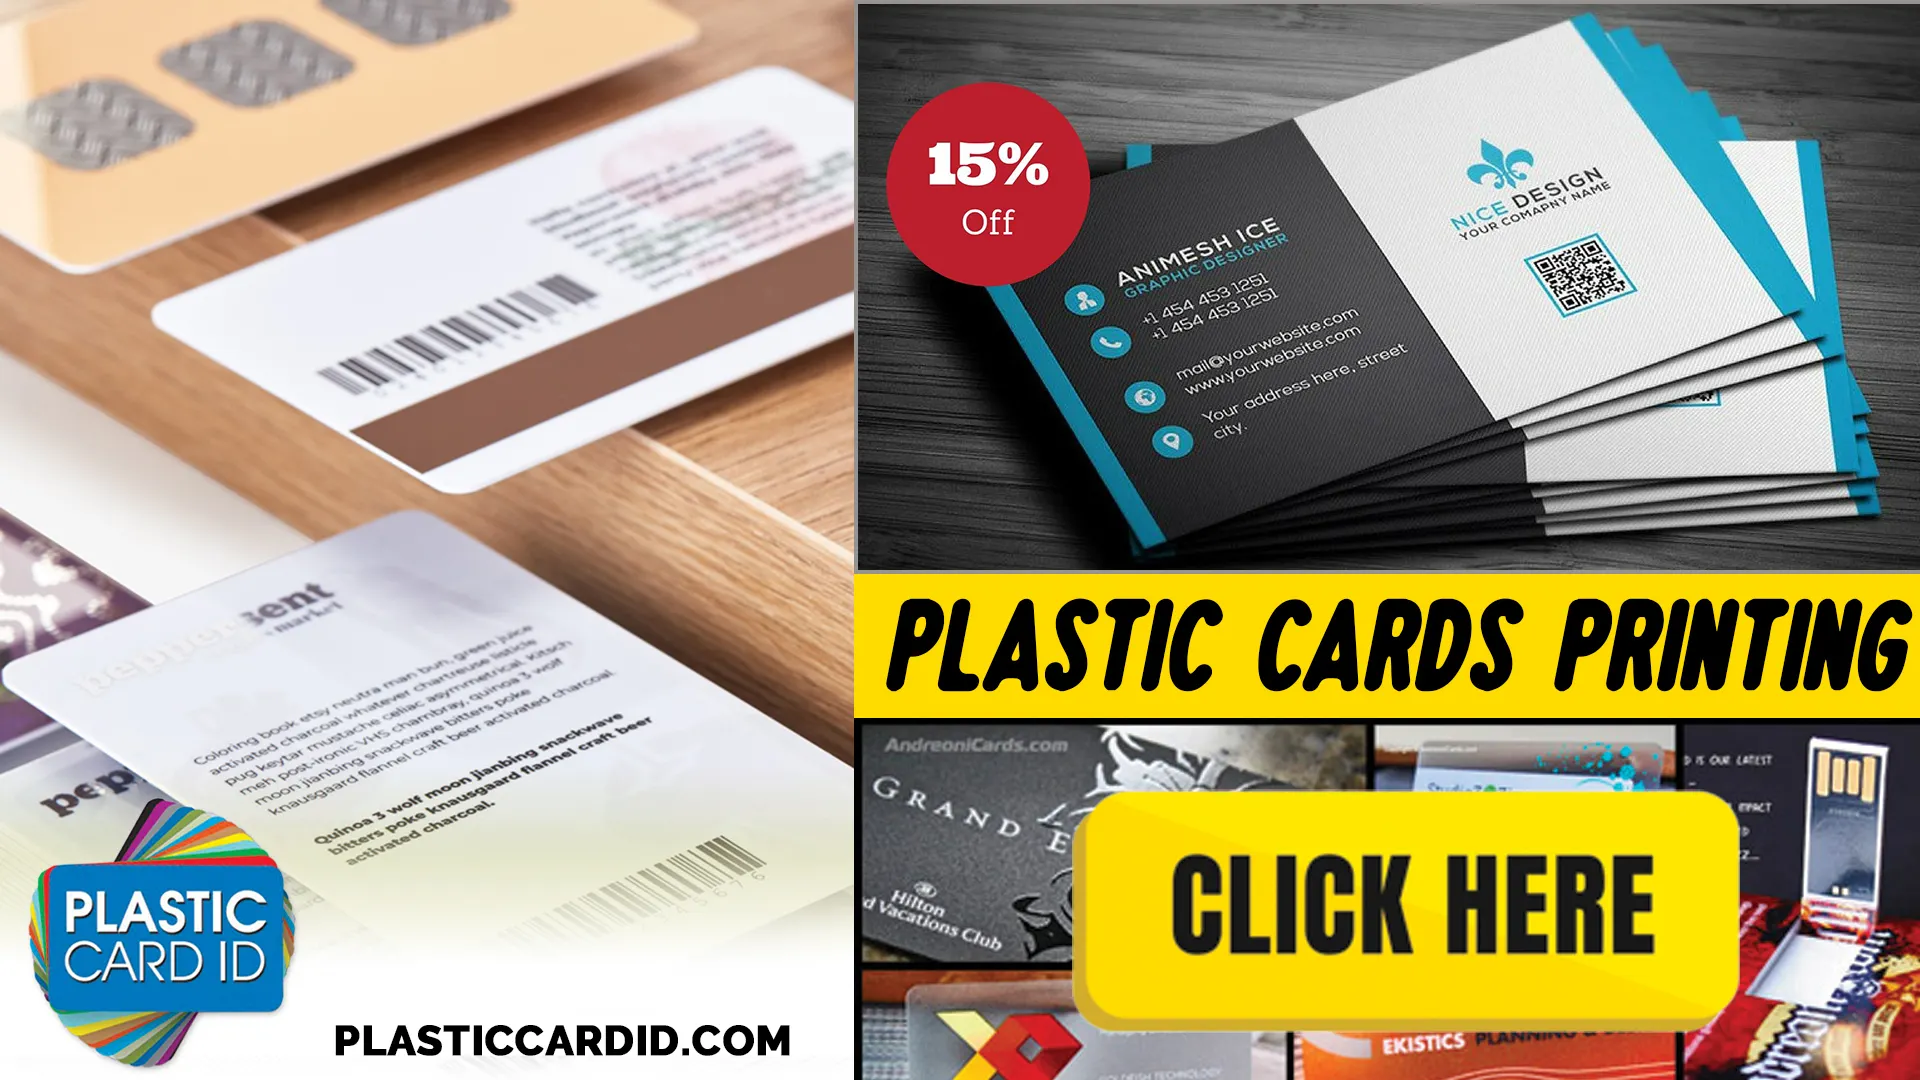 Plastic Card Creation: From Concept to Completion